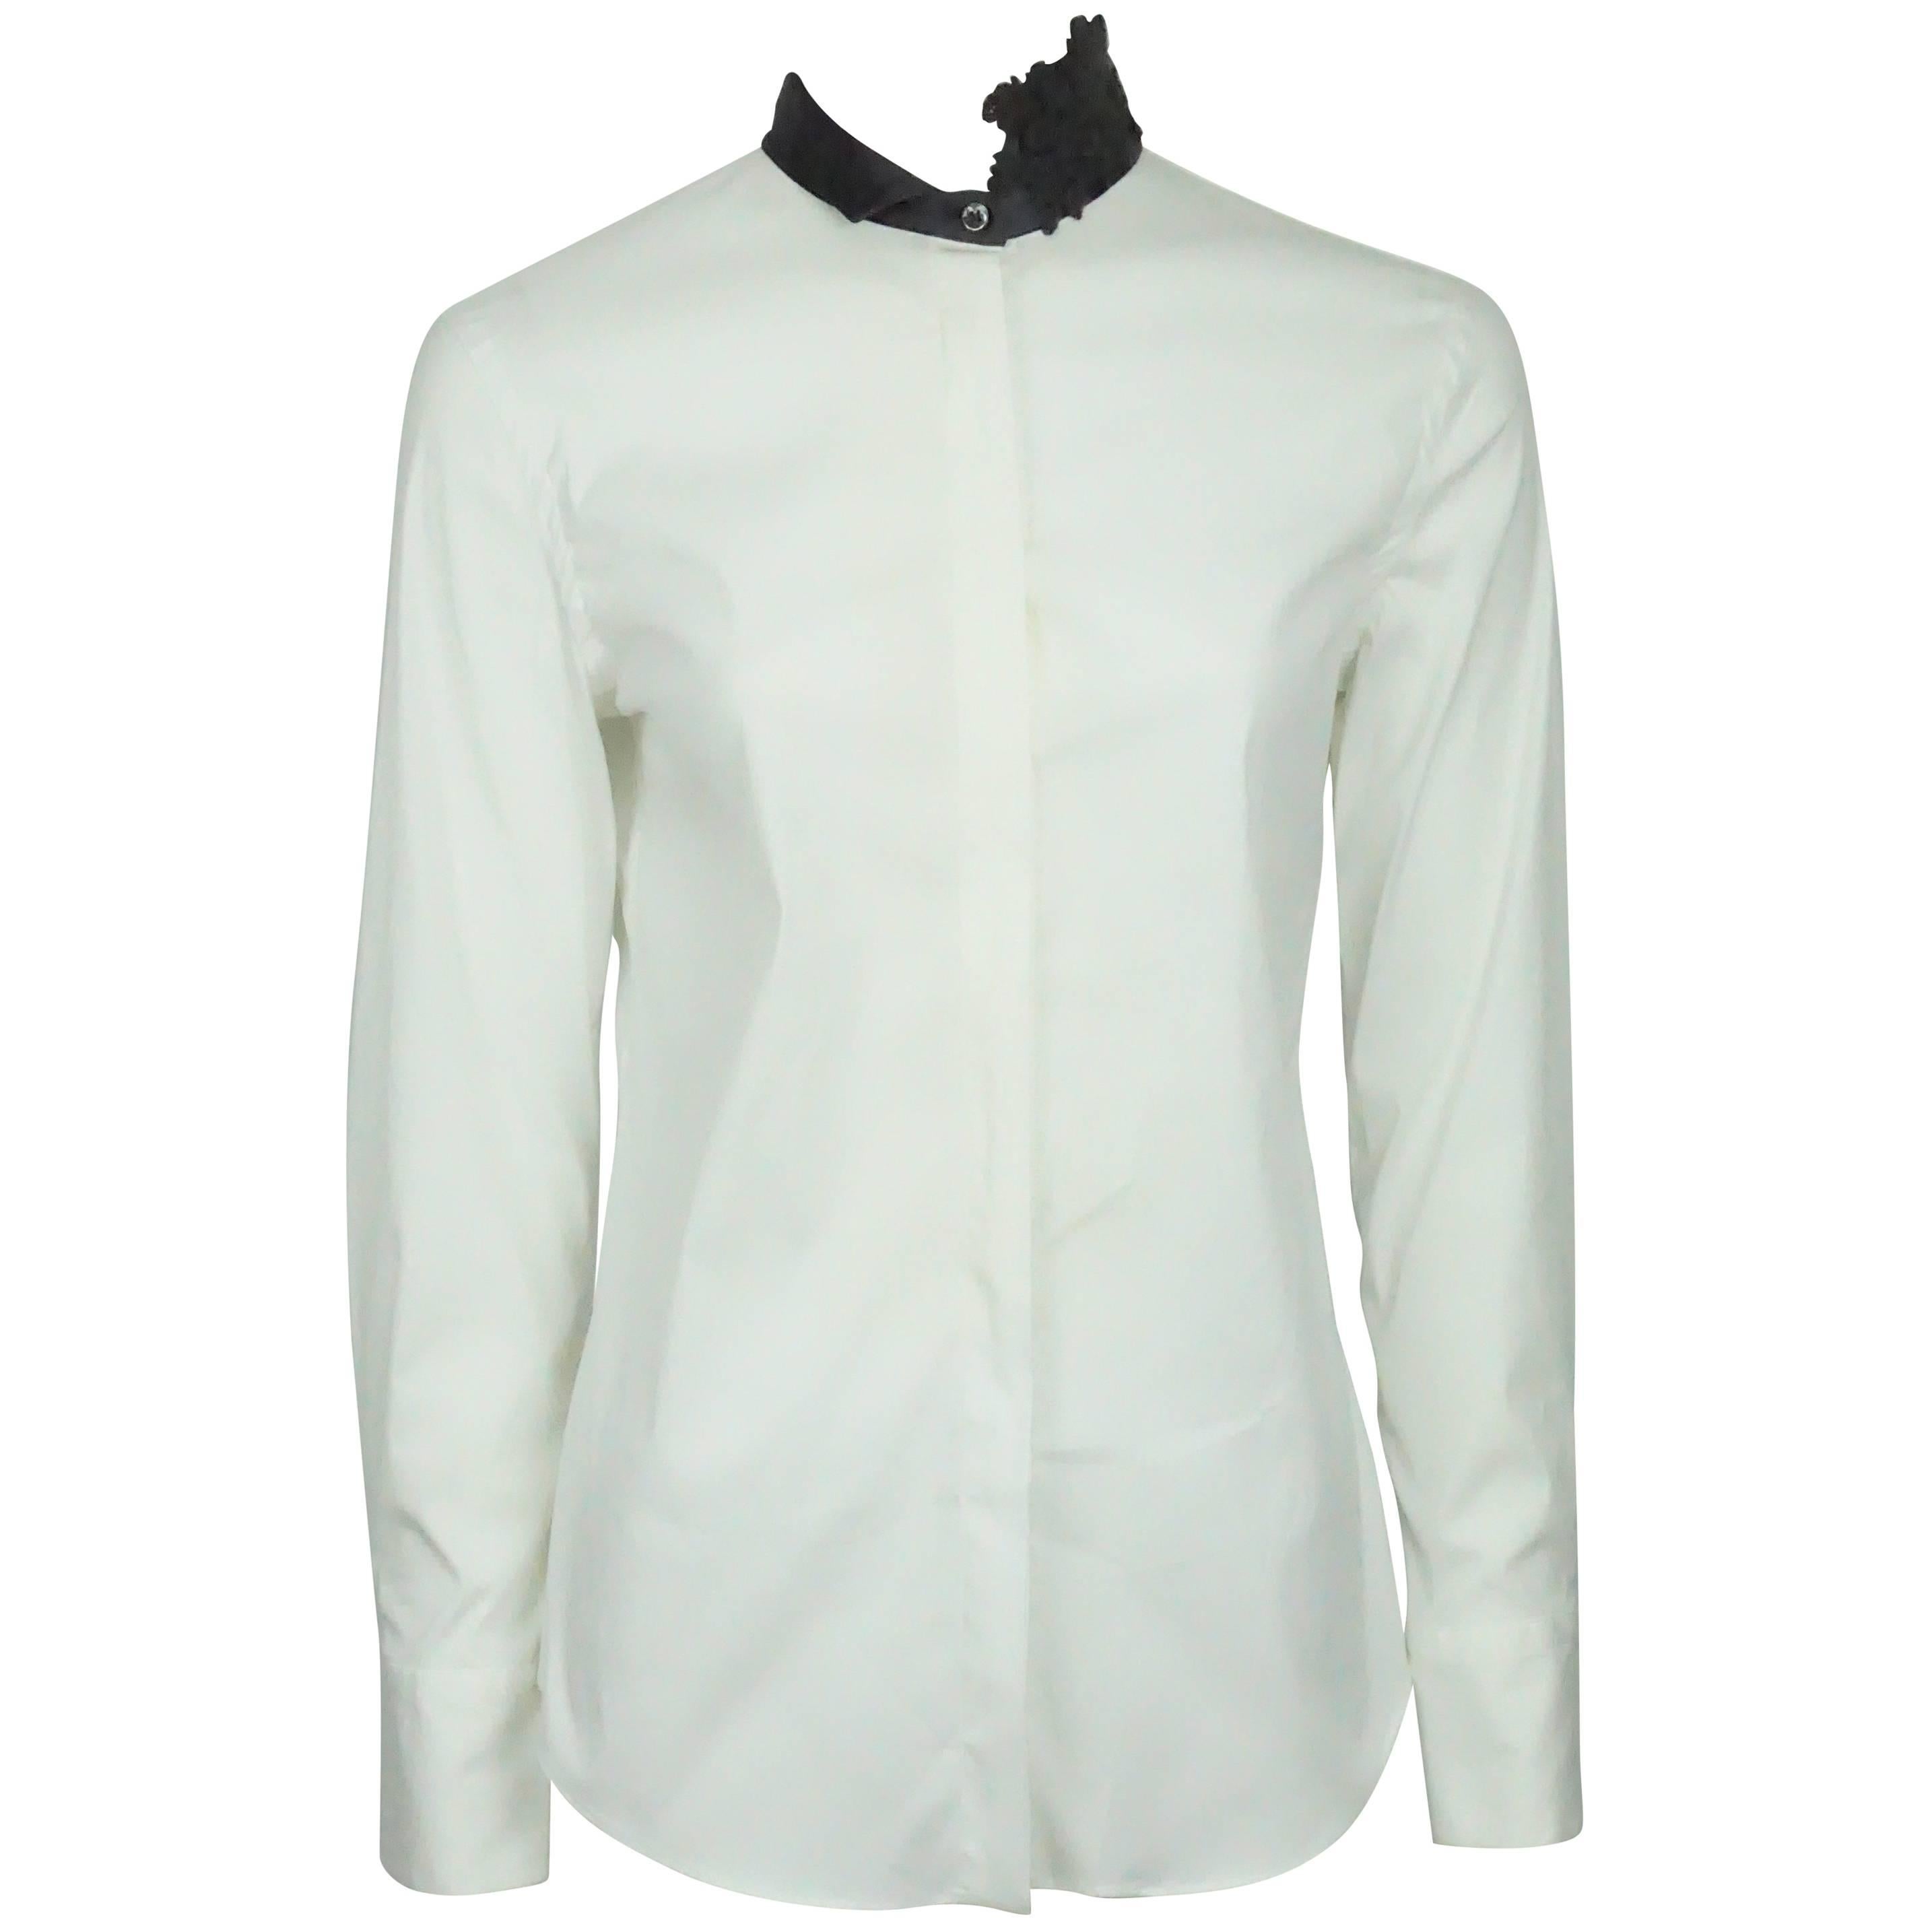 Brunello Cucinelli White Cotton Long Sleeve Shirt with Grey Collar - S